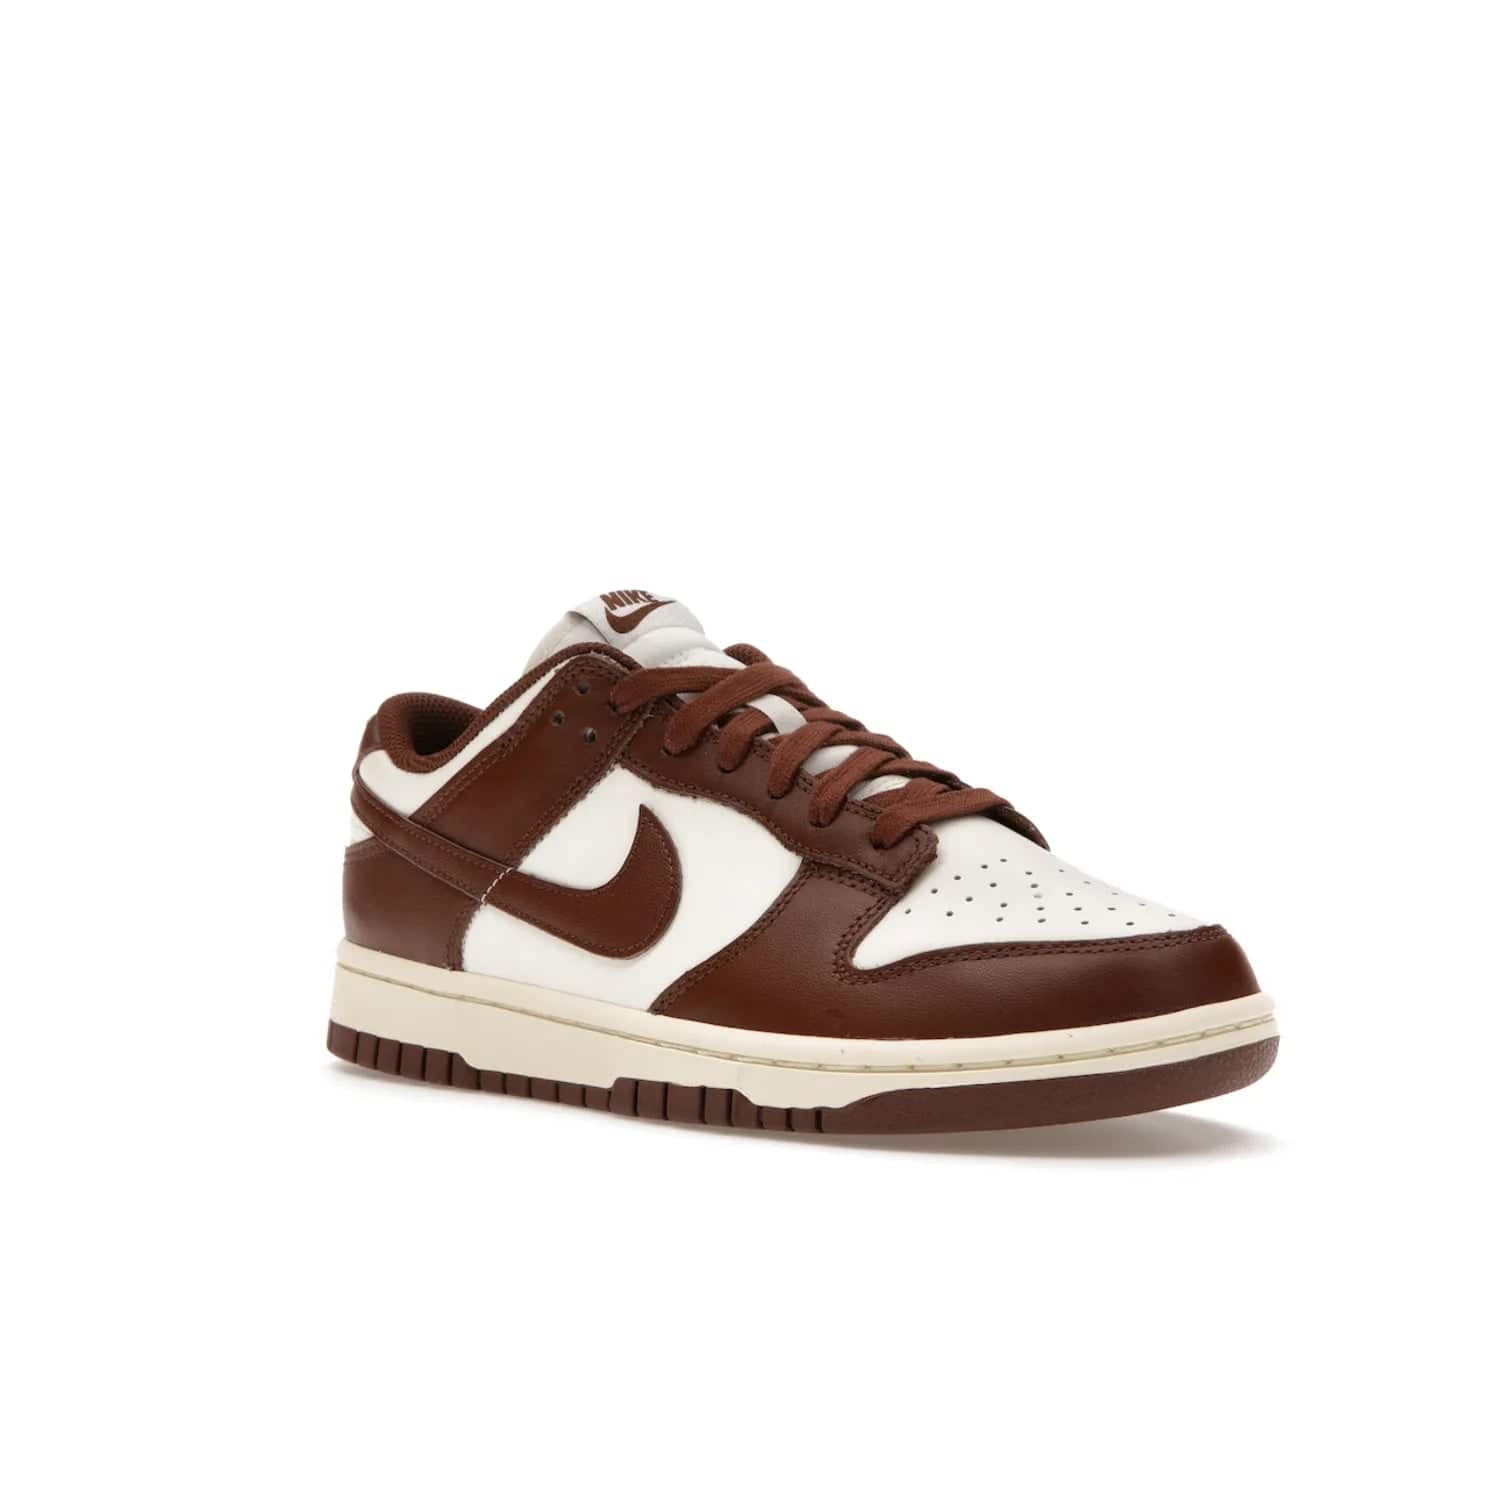 Nike Dunk Low Cacao Wow (Women's) - Image 5 - Only at www.BallersClubKickz.com - Revised
Get the Nike Dunk Low Cacao Wow and make a statement! Plush leather and a cool Cacao Wow finish bring together a unique mix of comfort and fashion that will turn heads. Boosted with a Coconut Milk hue. Shop today.